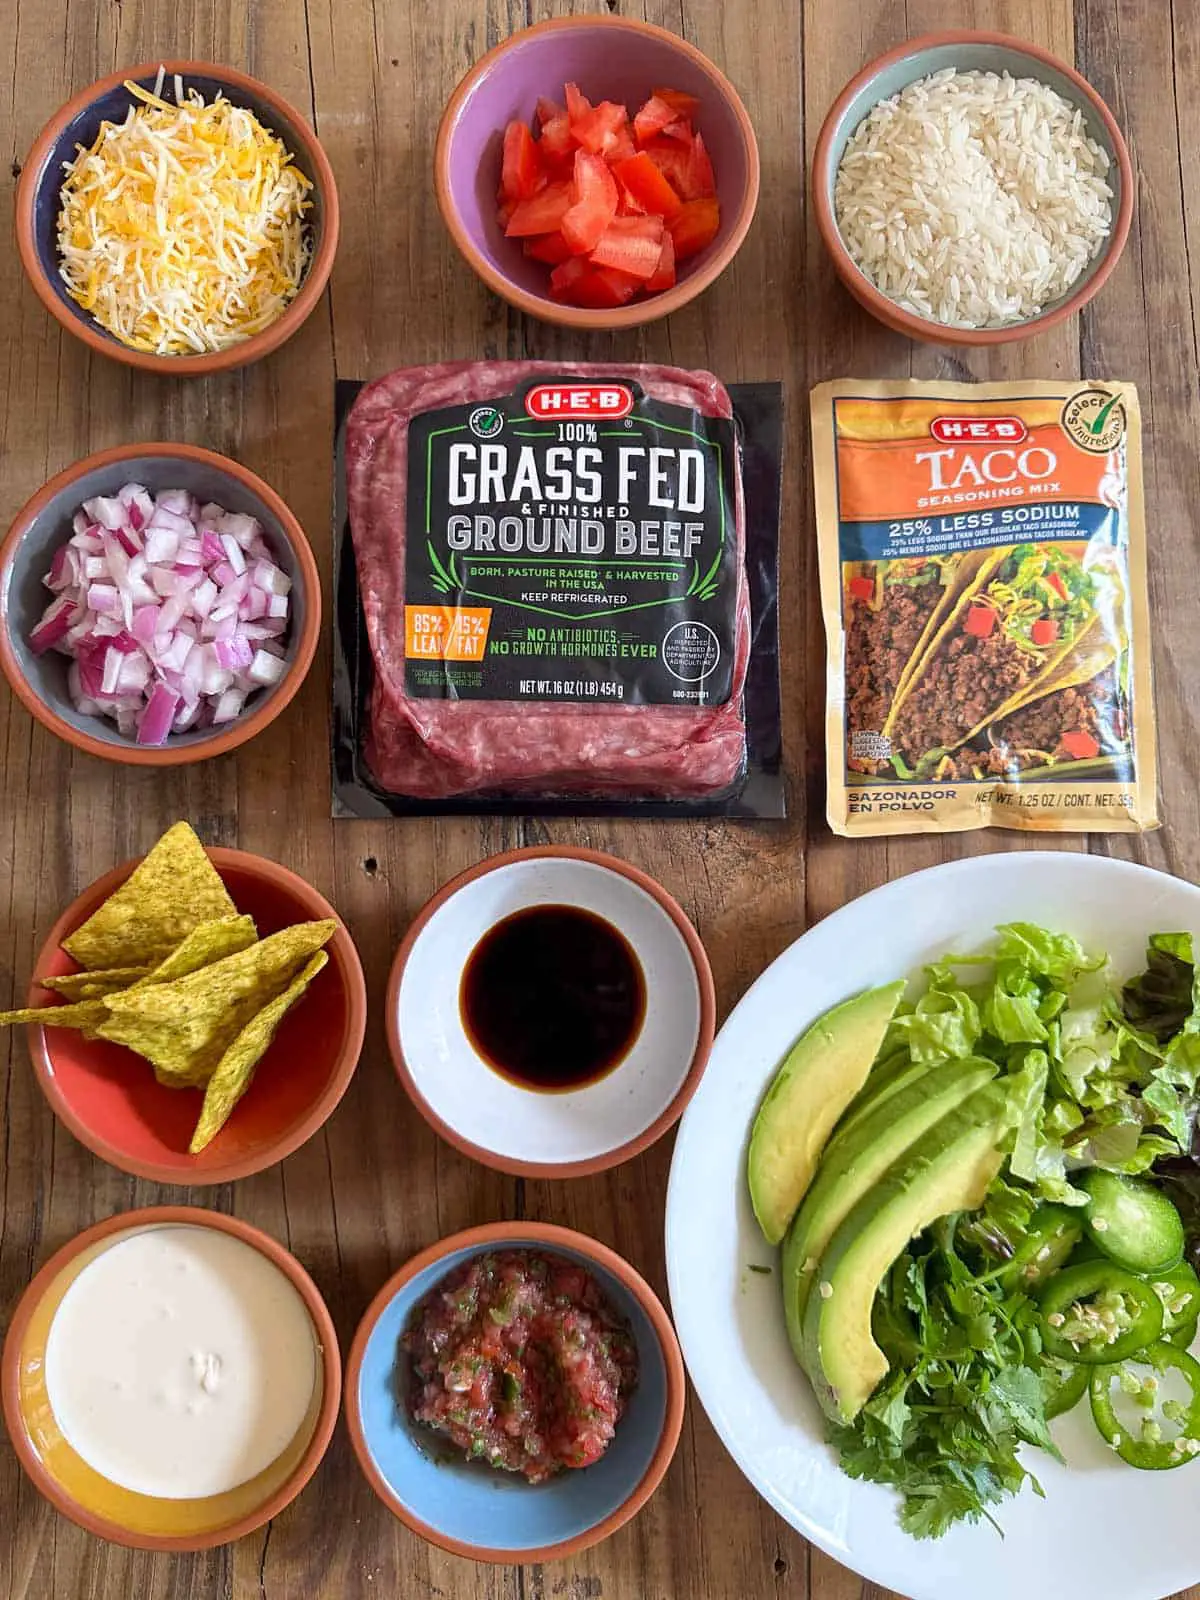 Bowls containing shredded cheese, diced tomato, rice, diced onion, tortilla chips, soy sauce, sour cream, salsa, and lettuce, avocado, cilantro and sliced jalapenos. There is also a pack of Grass Fed Ground beef and Taco seasoning mix.